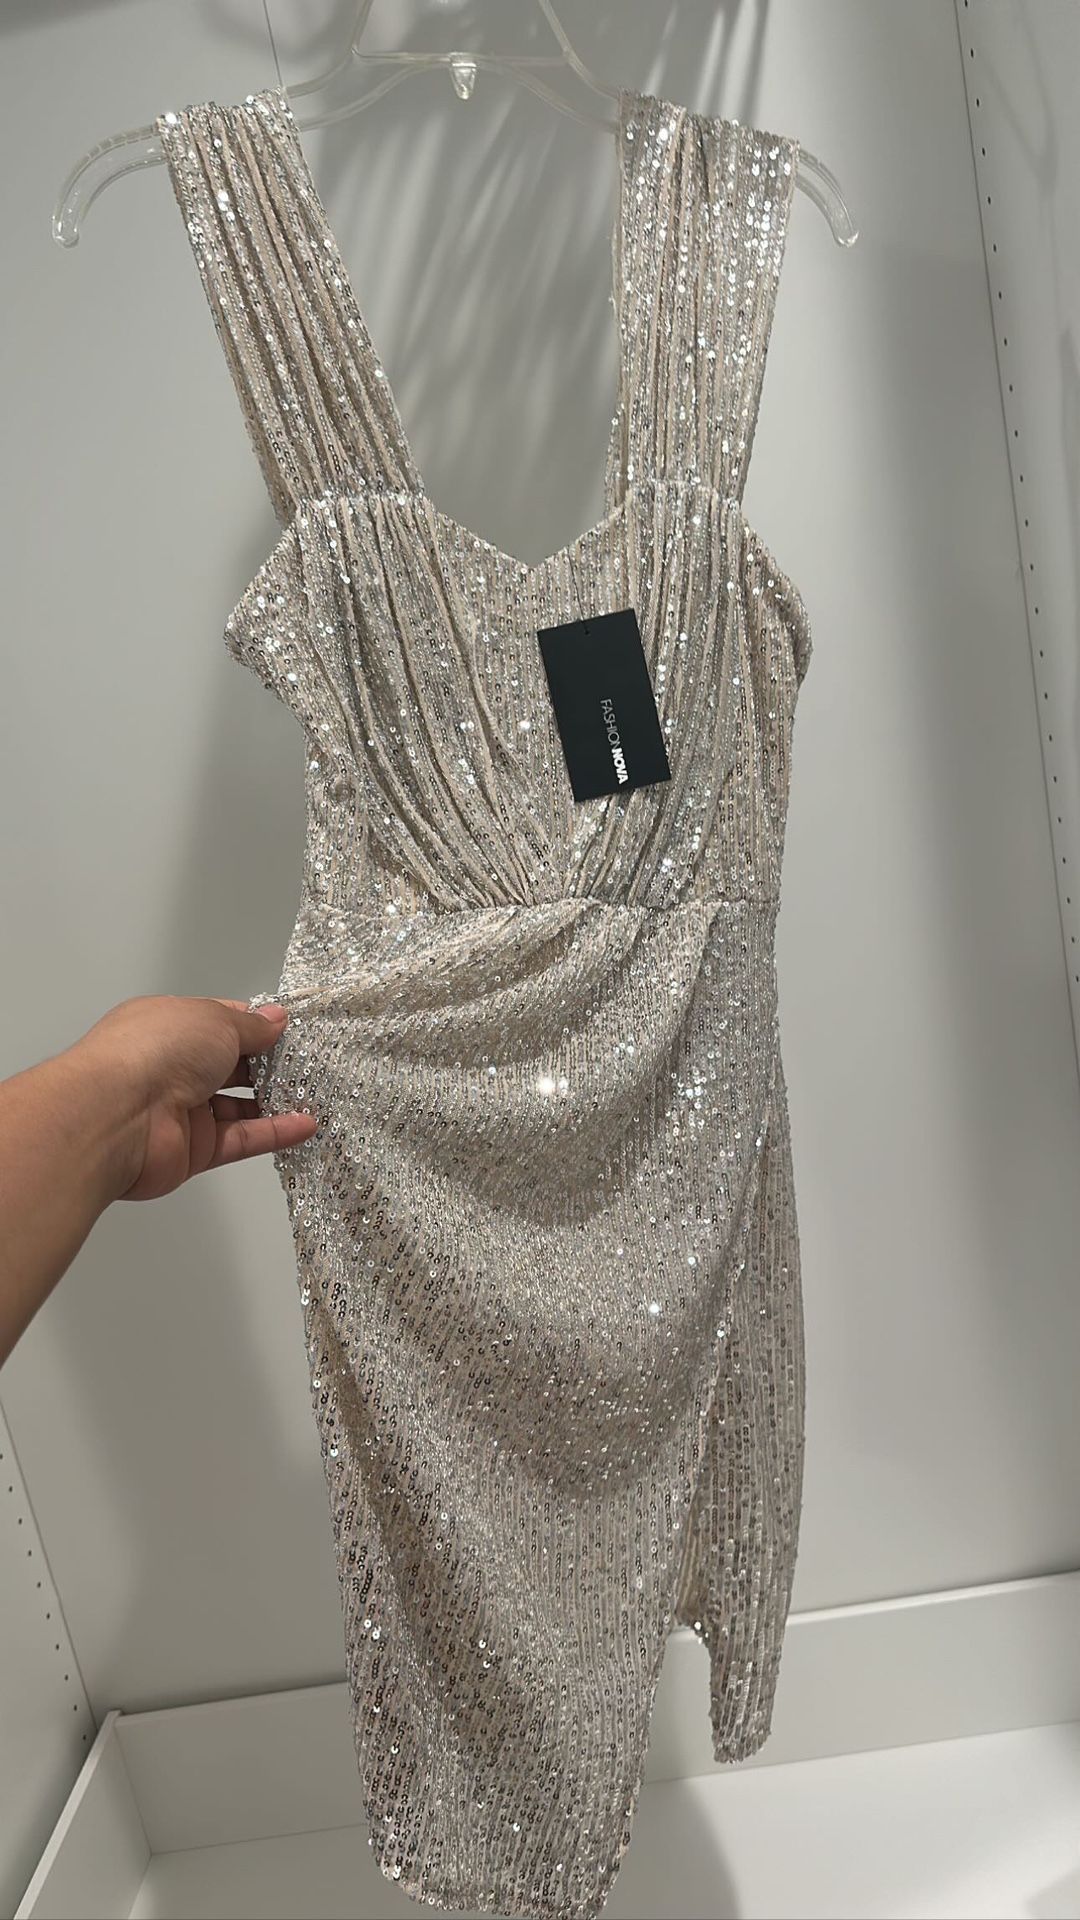 Brand New Sequin Dress With Slit On Side